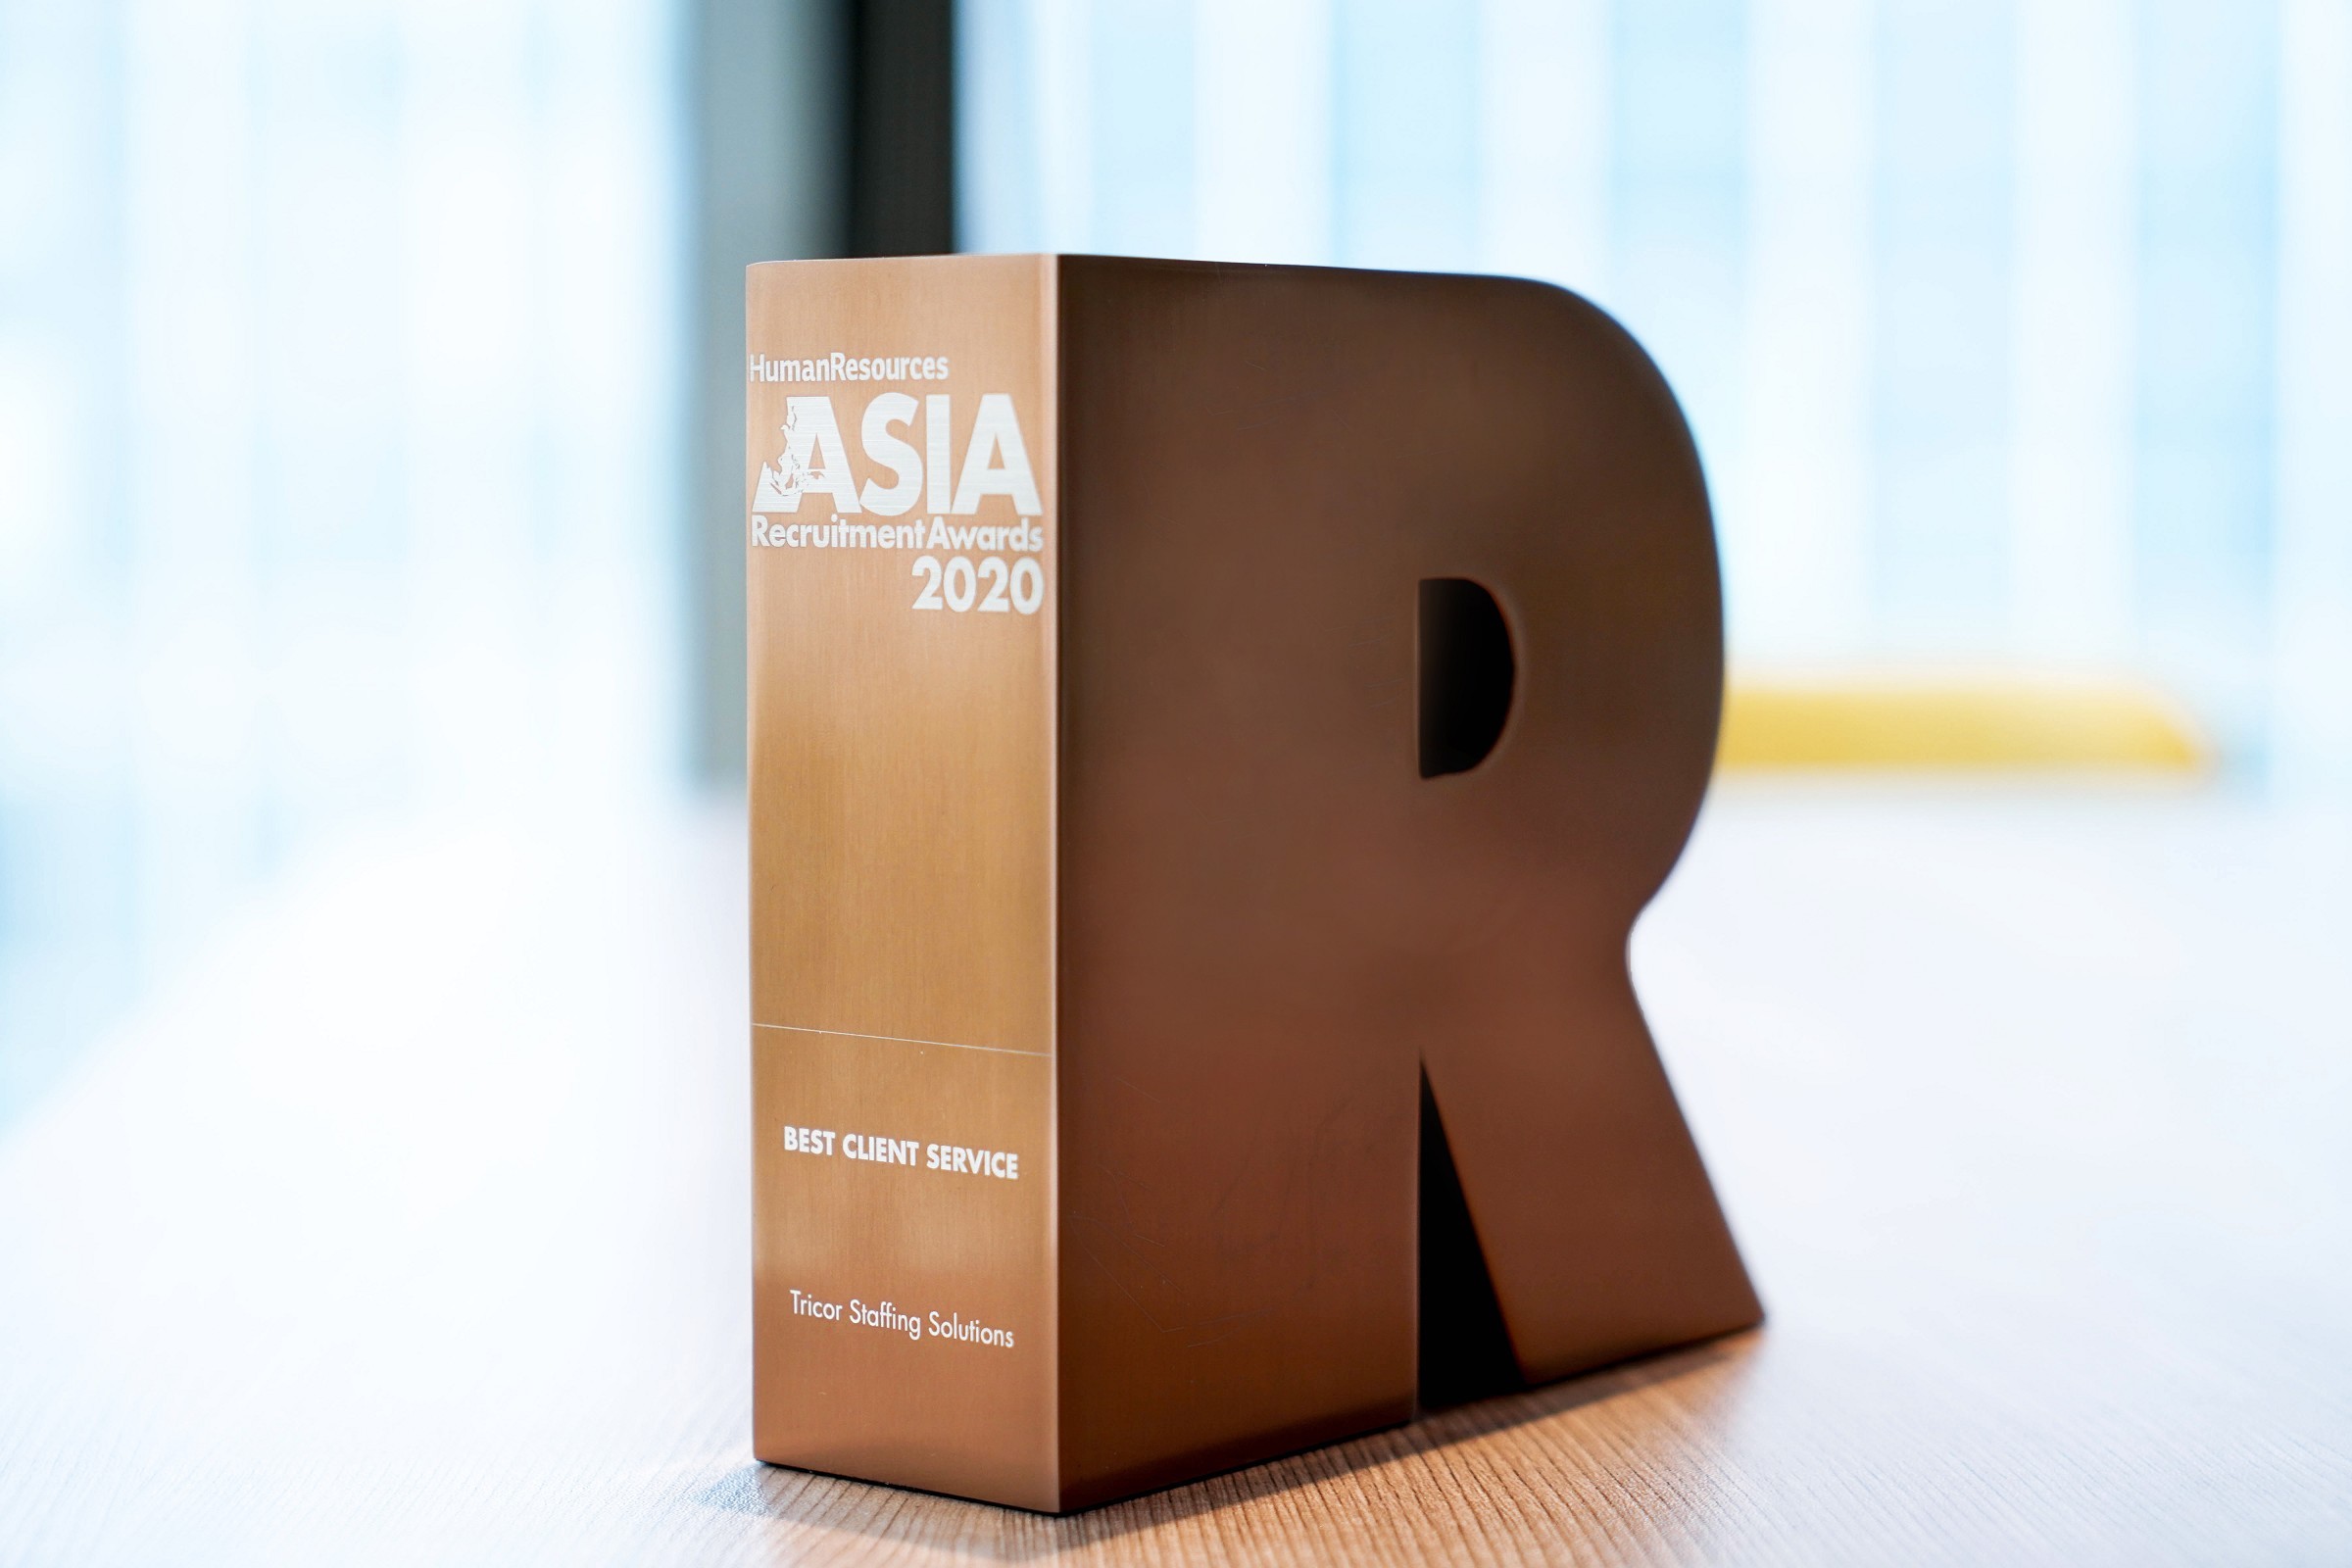 Best Client Service at the Asia Recruitment Awards 